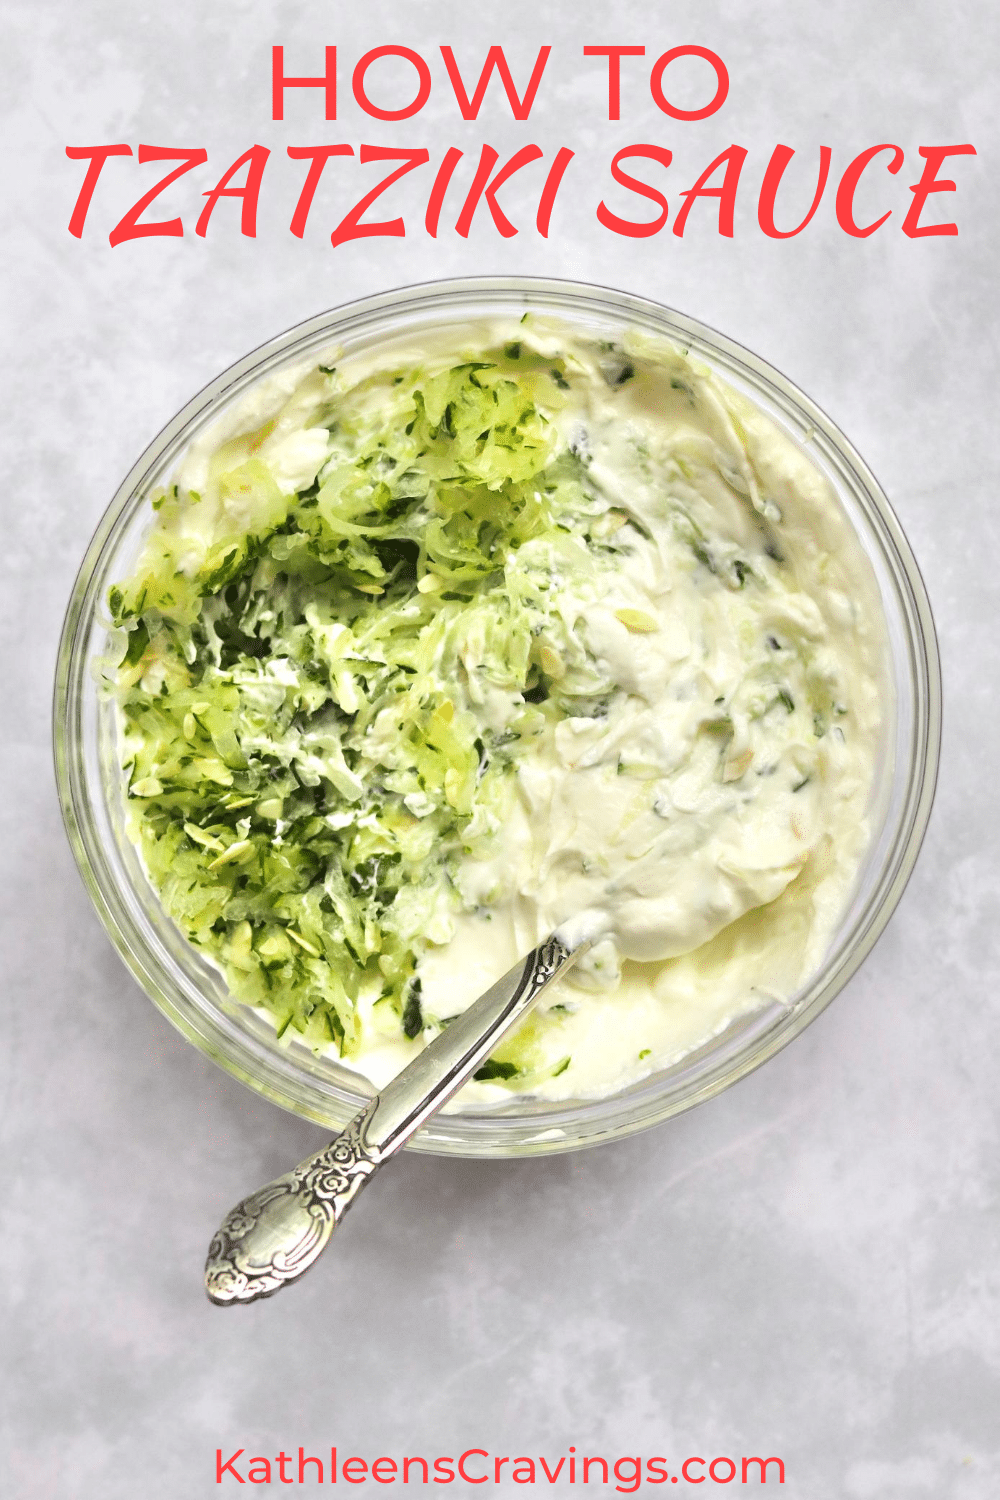 Bowl of tzatziki sauce with grated cucumber and text overlay